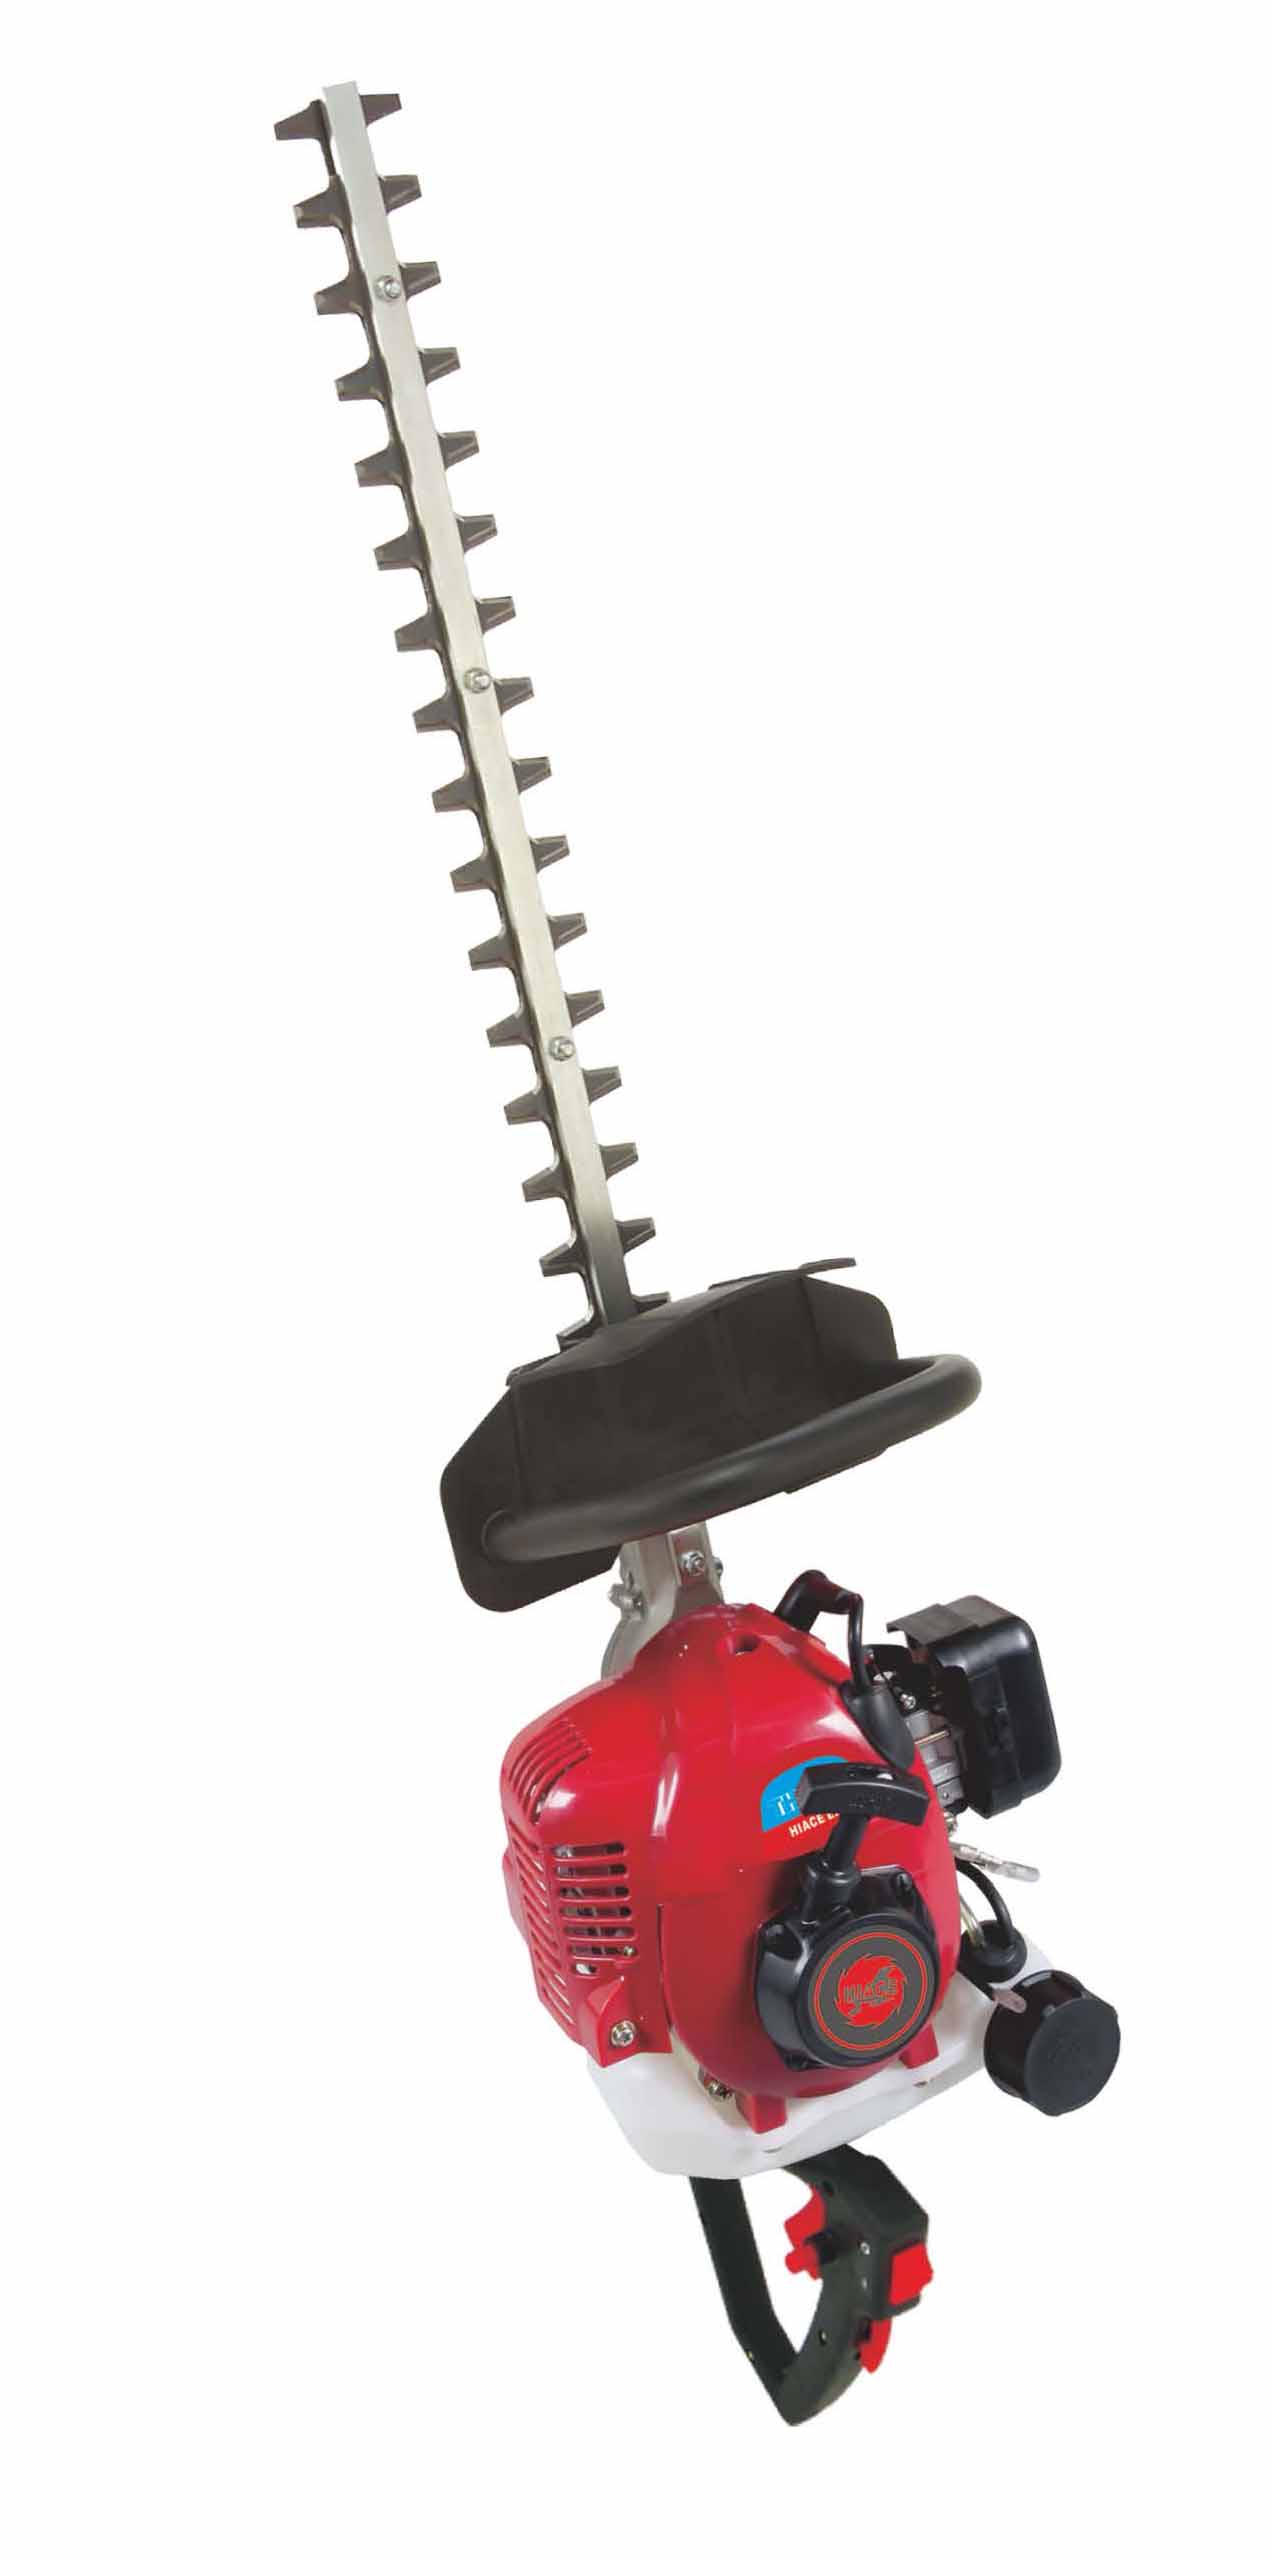 Shafted Hedge Trimmer